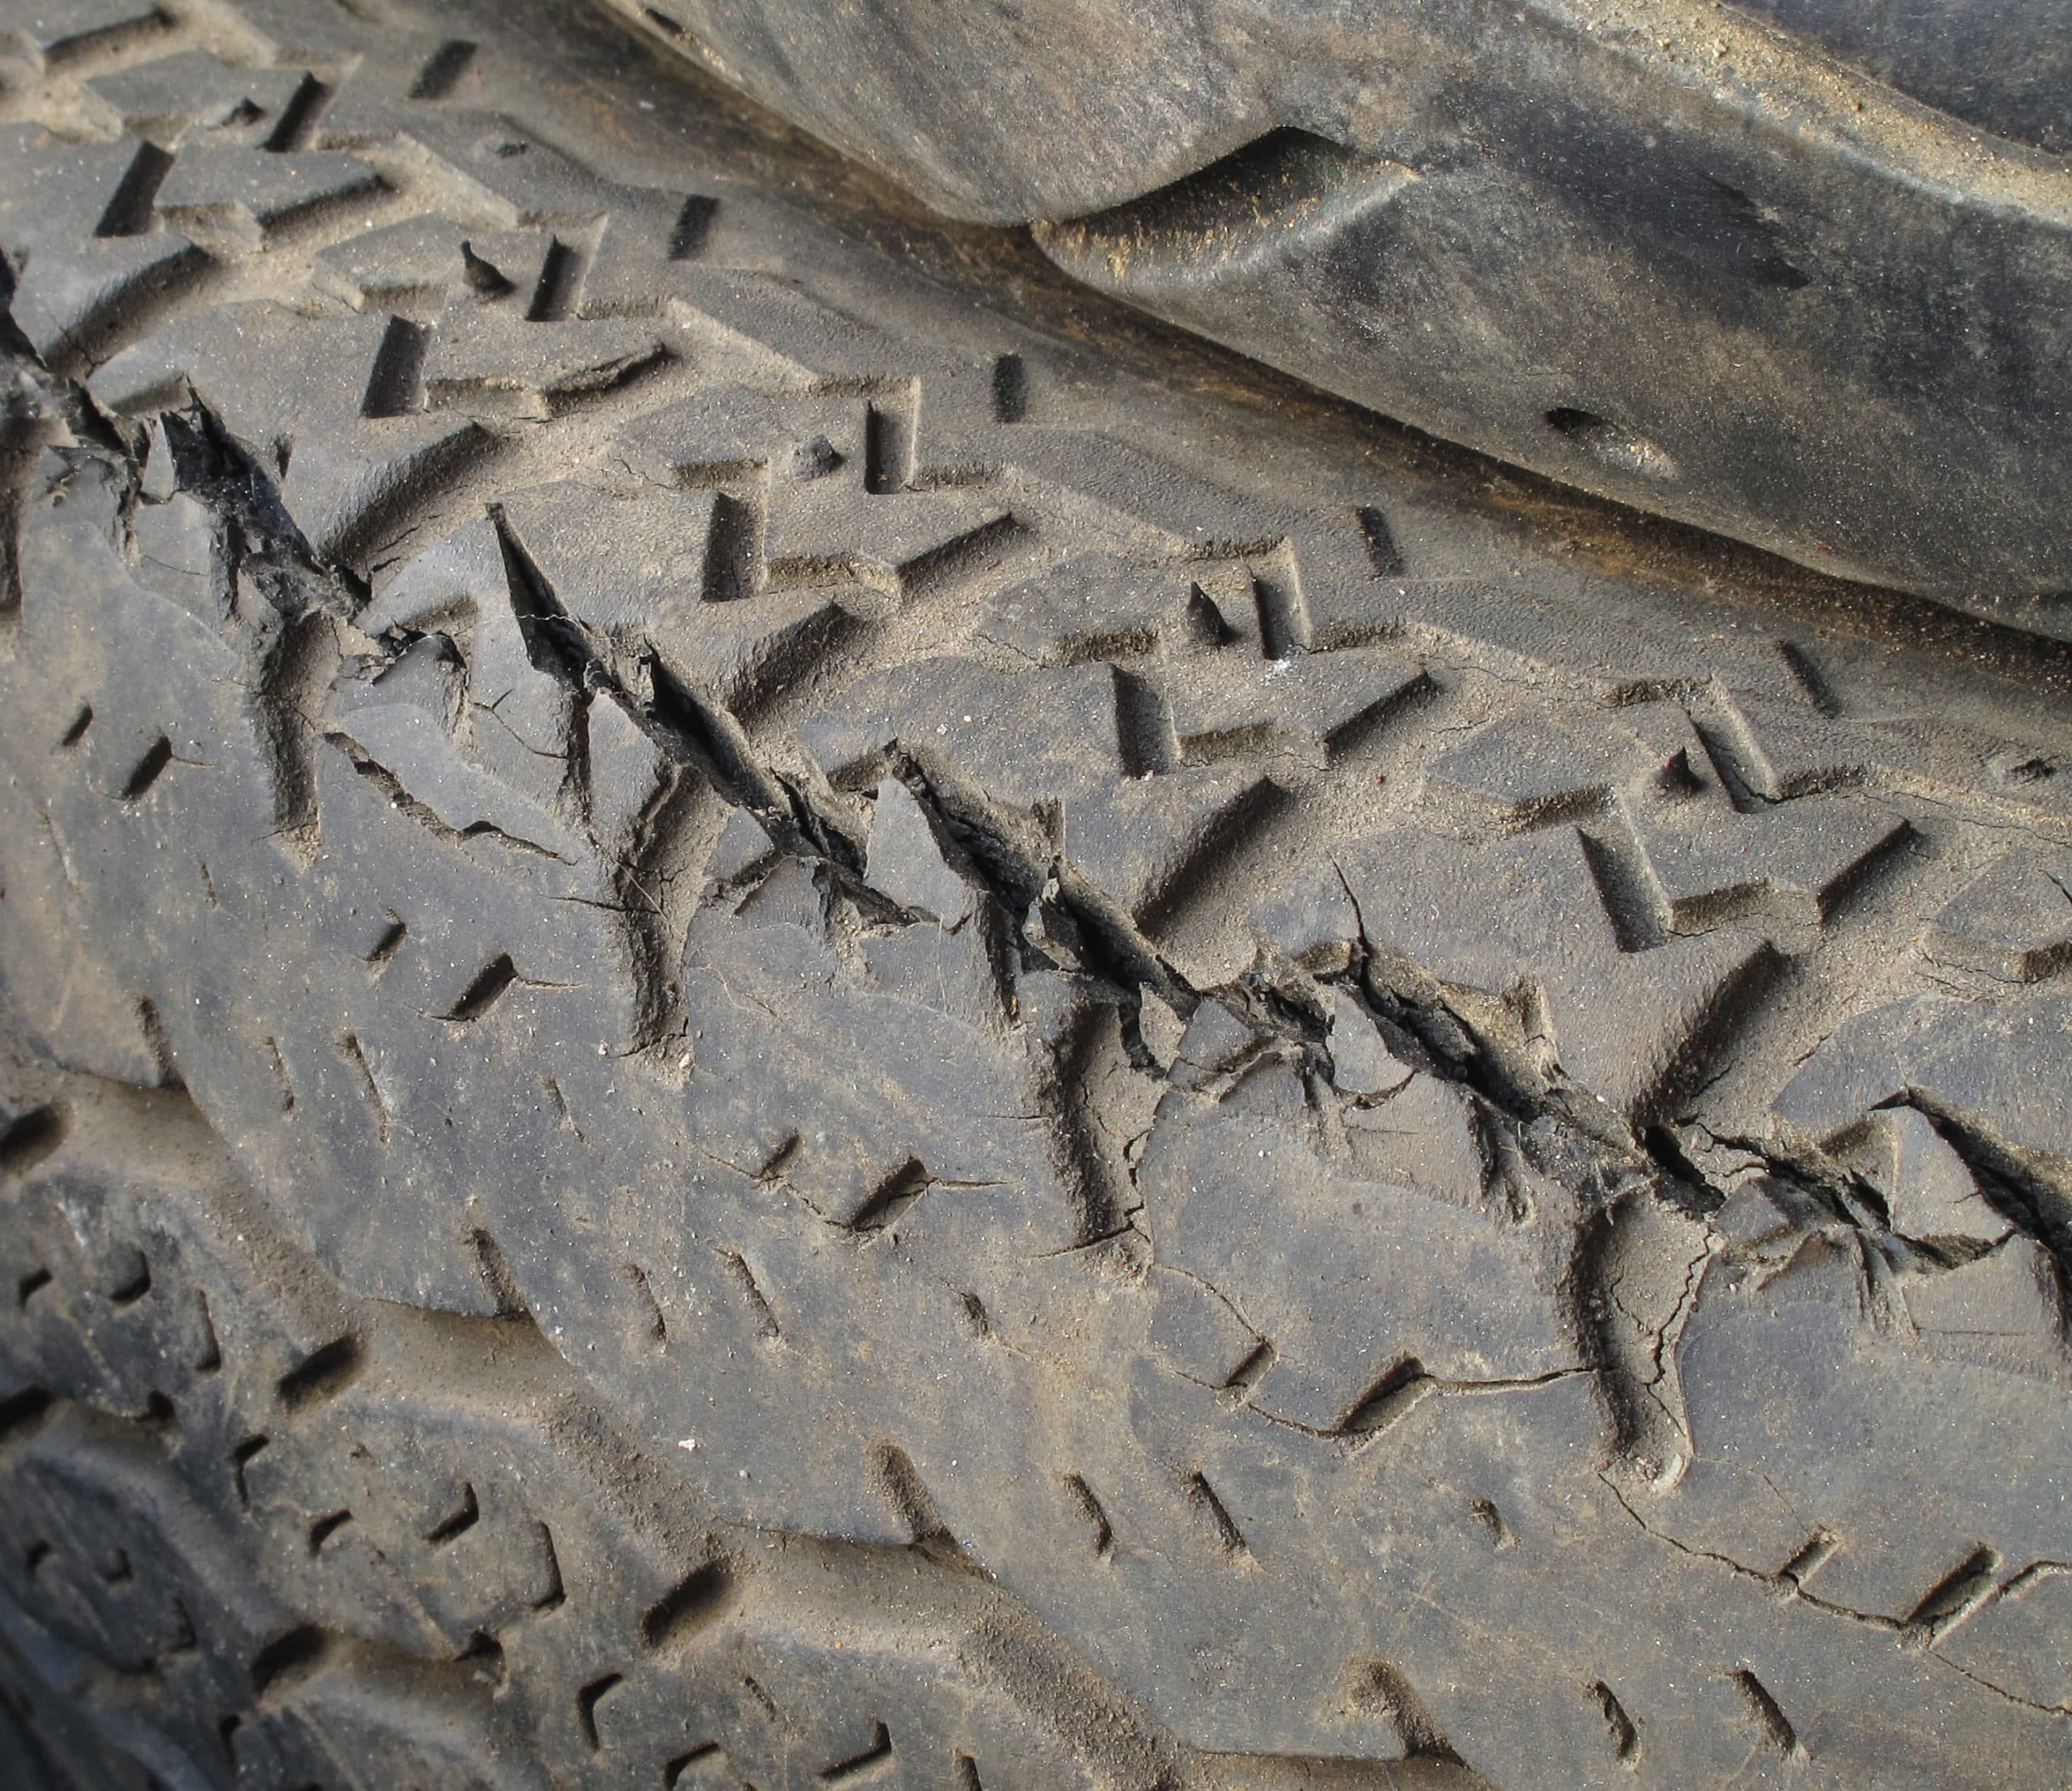 Drivers Beware: What You Need to Know About Cracking Tires